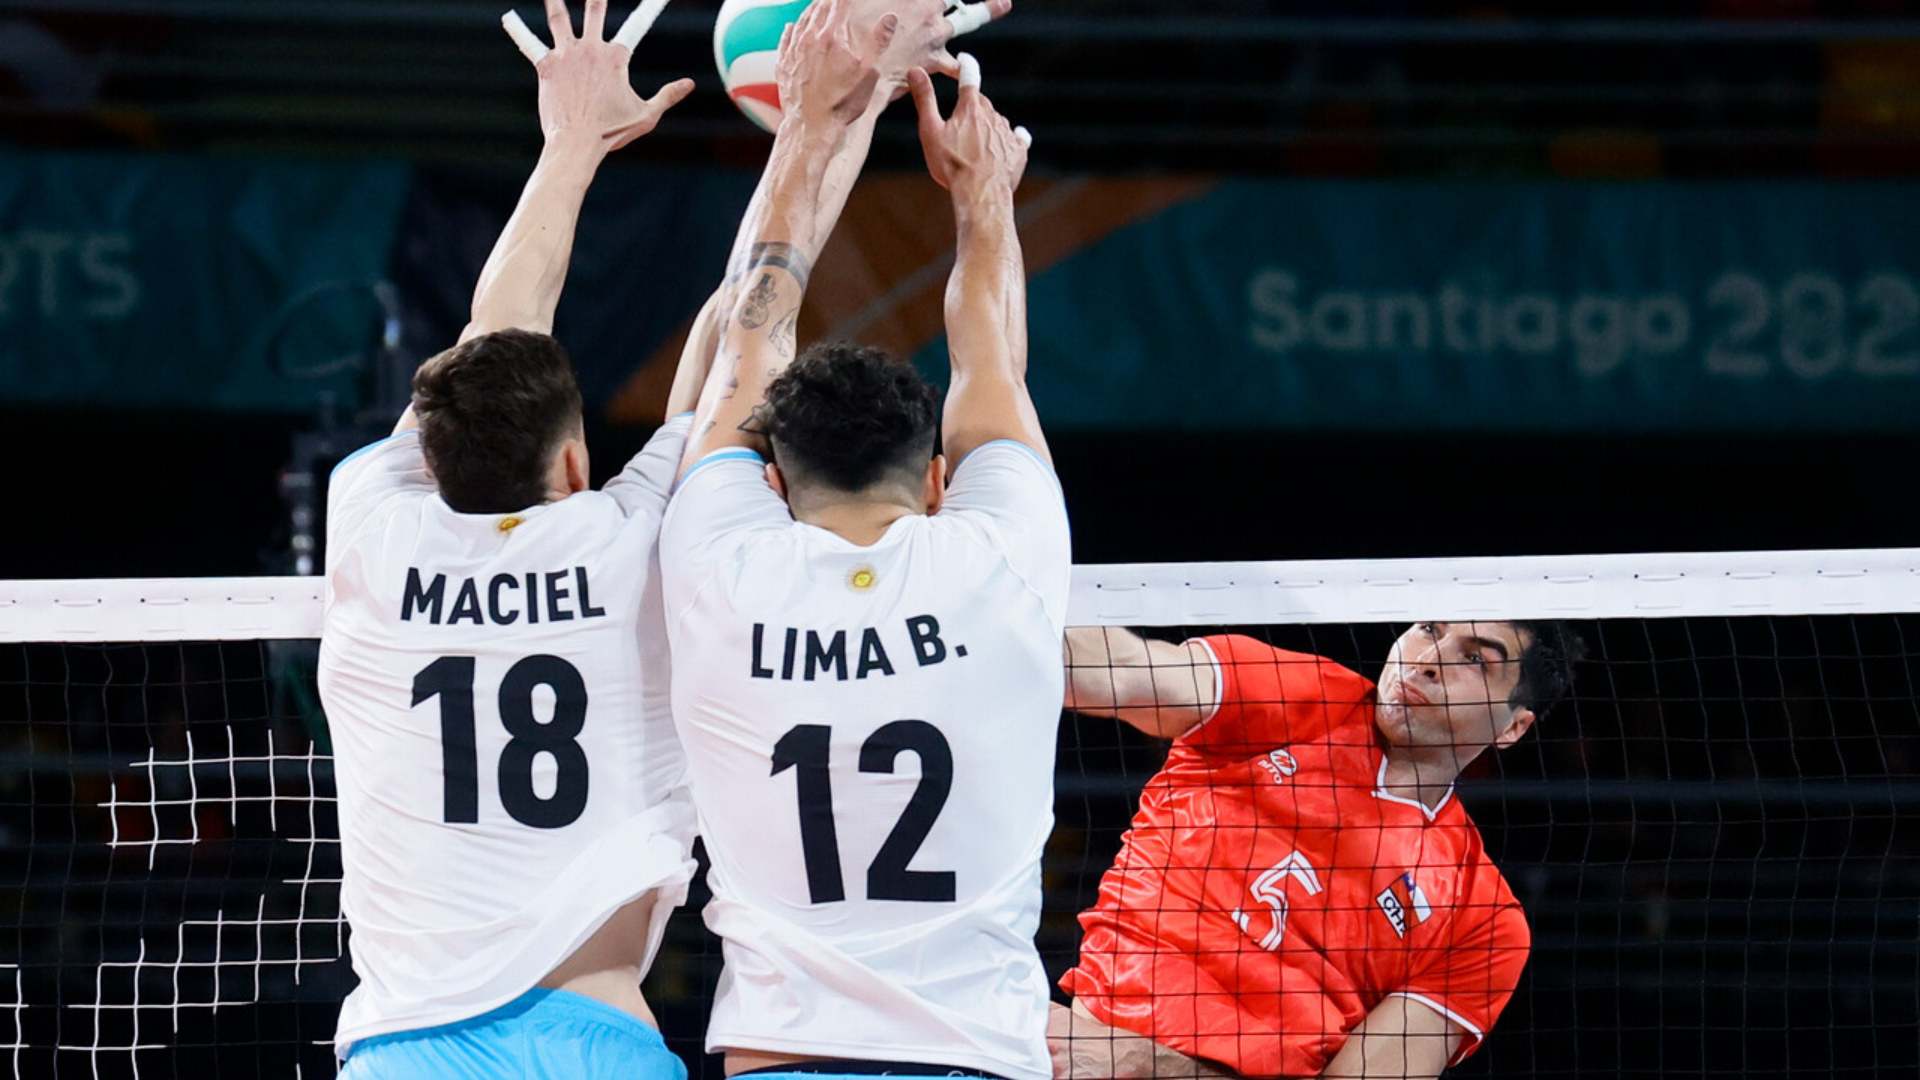 Argentina advances to semifinals of male's volleyball by defeating Chile